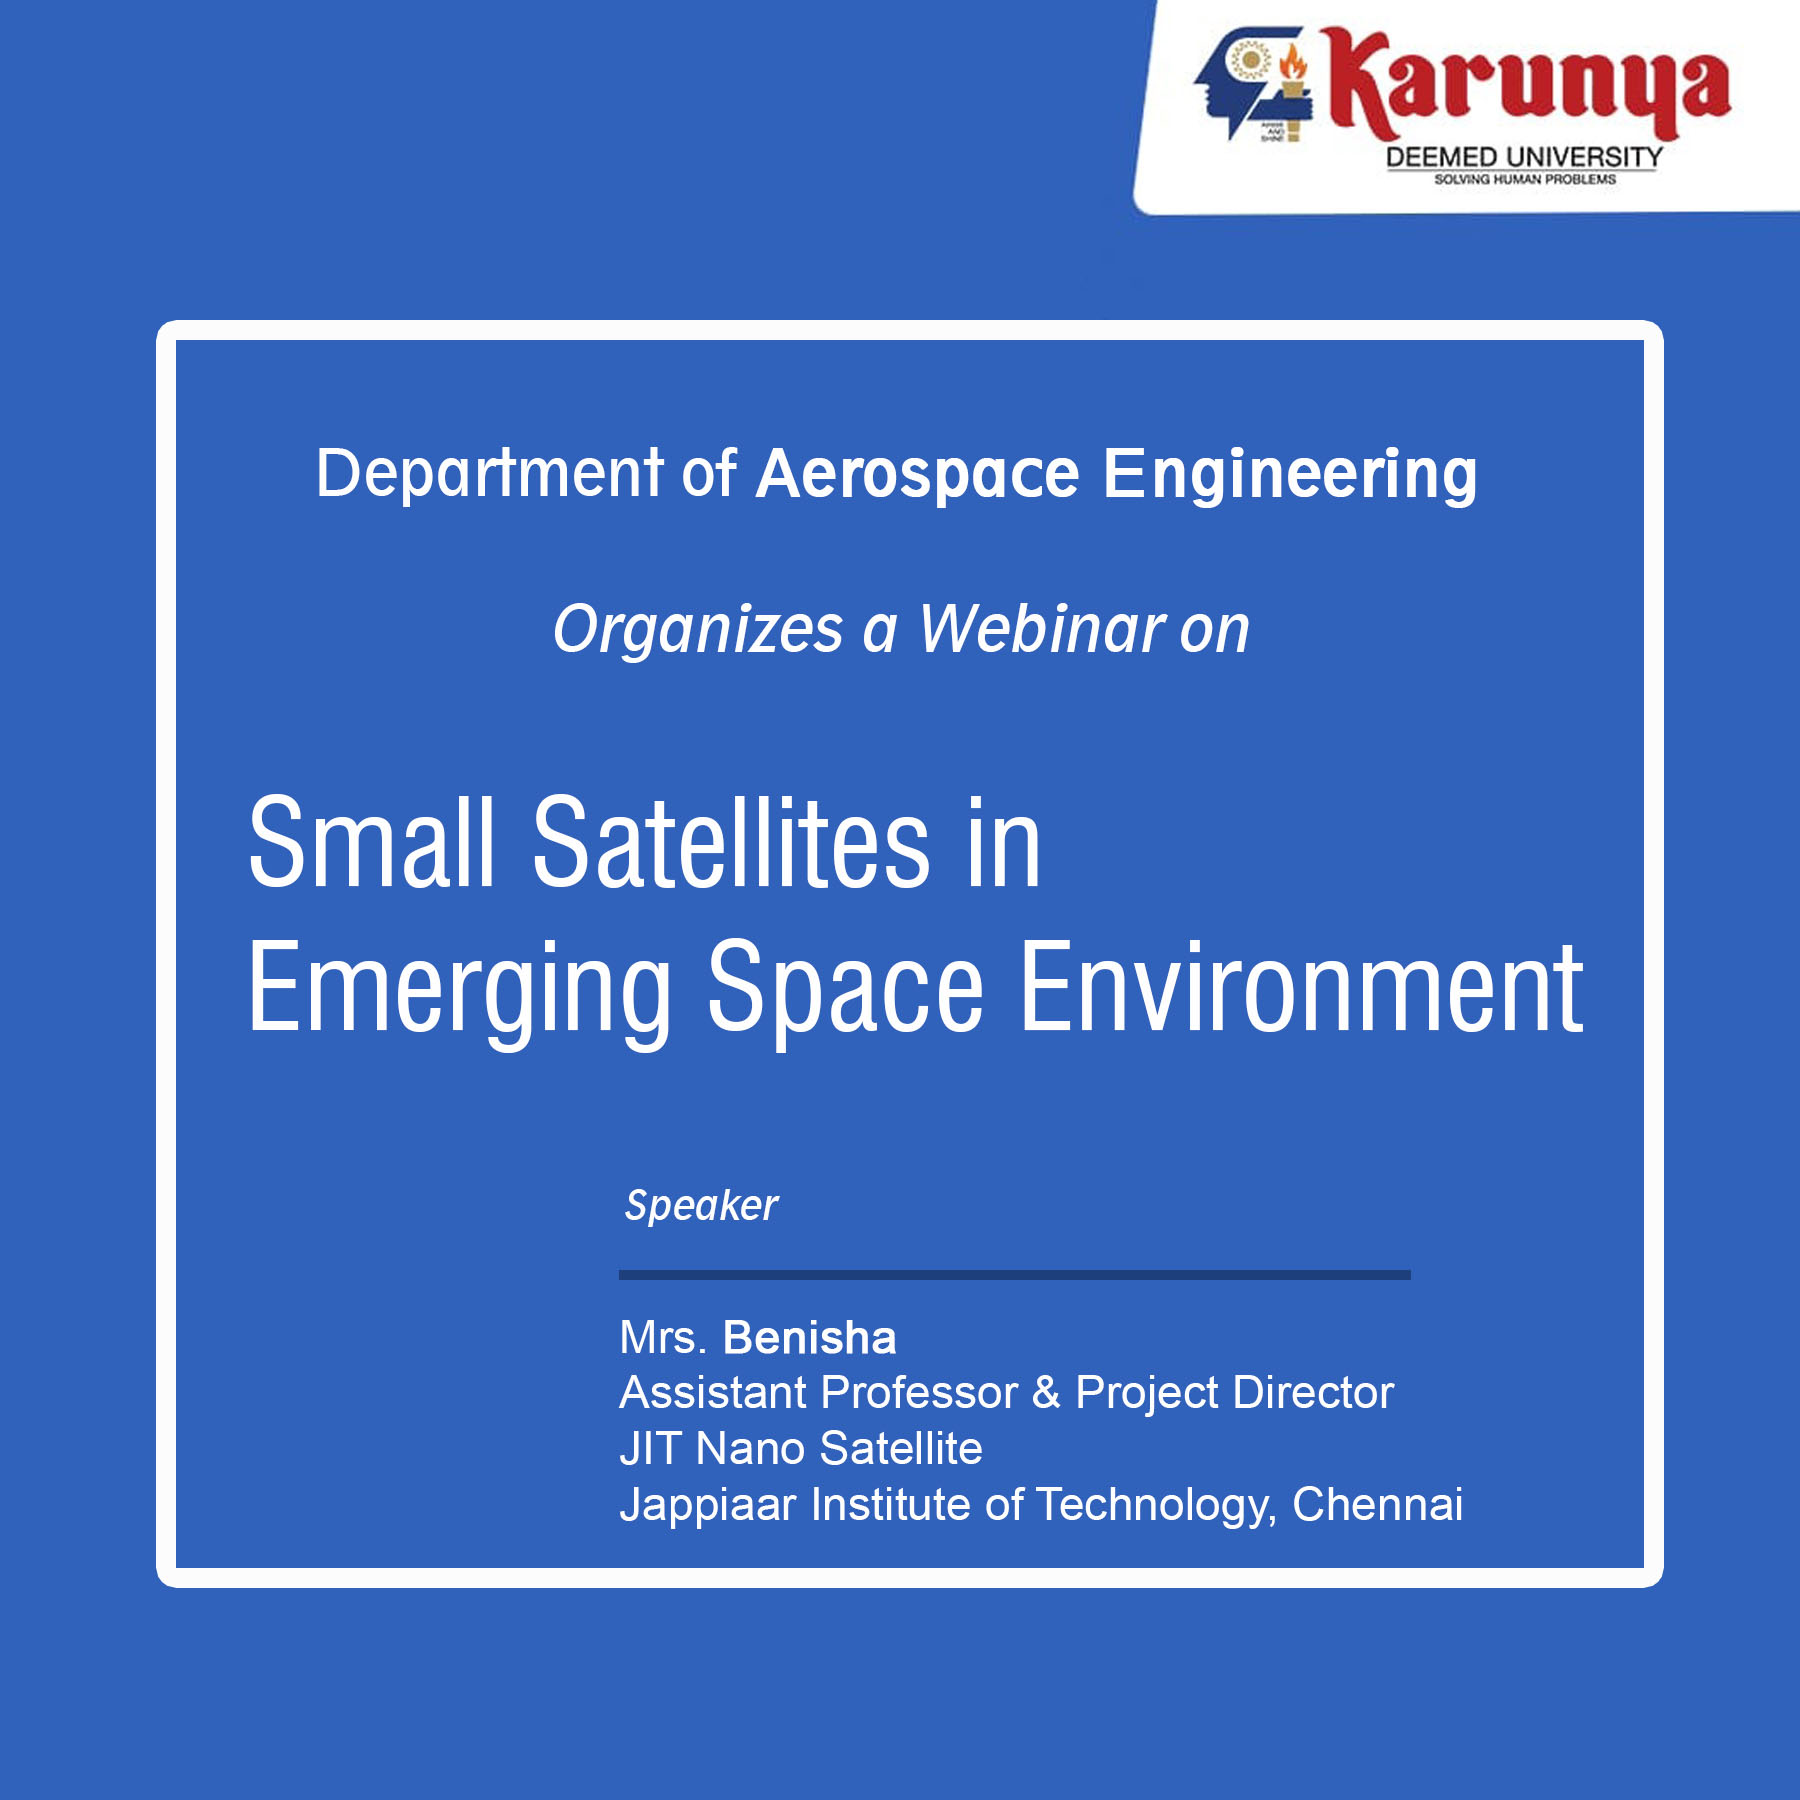 Small-Satellites-in-Emerging-Space-Environment